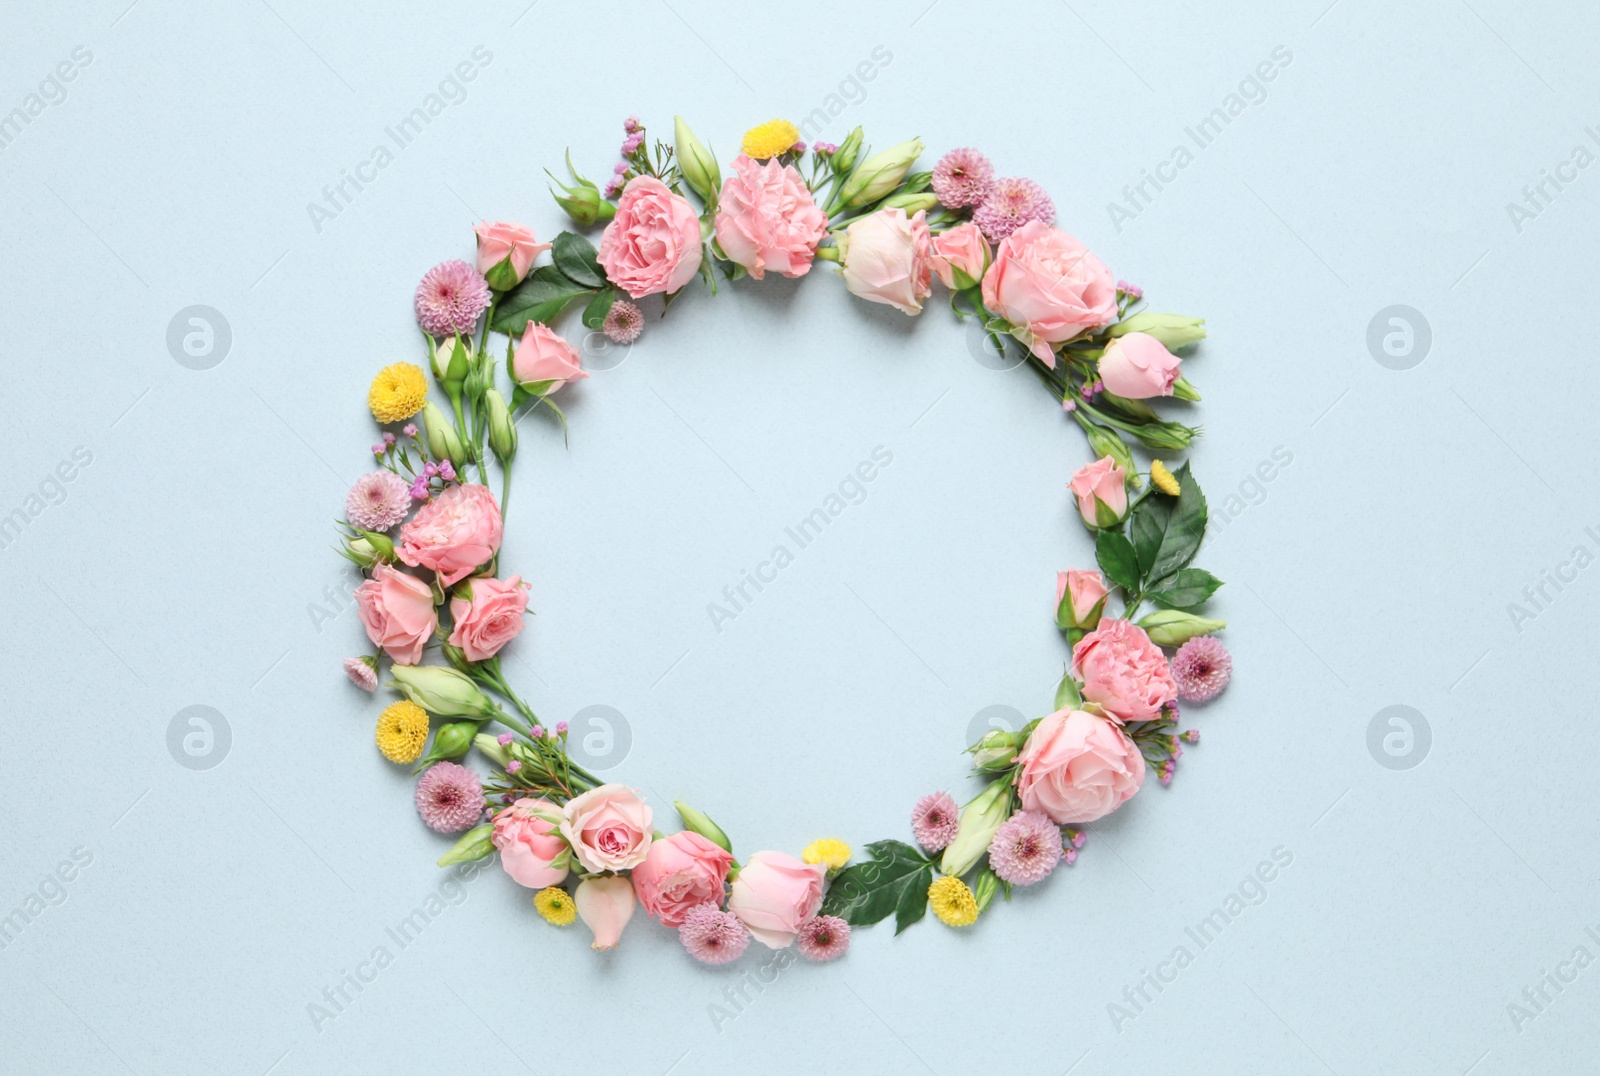 Photo of Wreath made of beautiful flowers and green leaves on light background, flat lay. Space for text